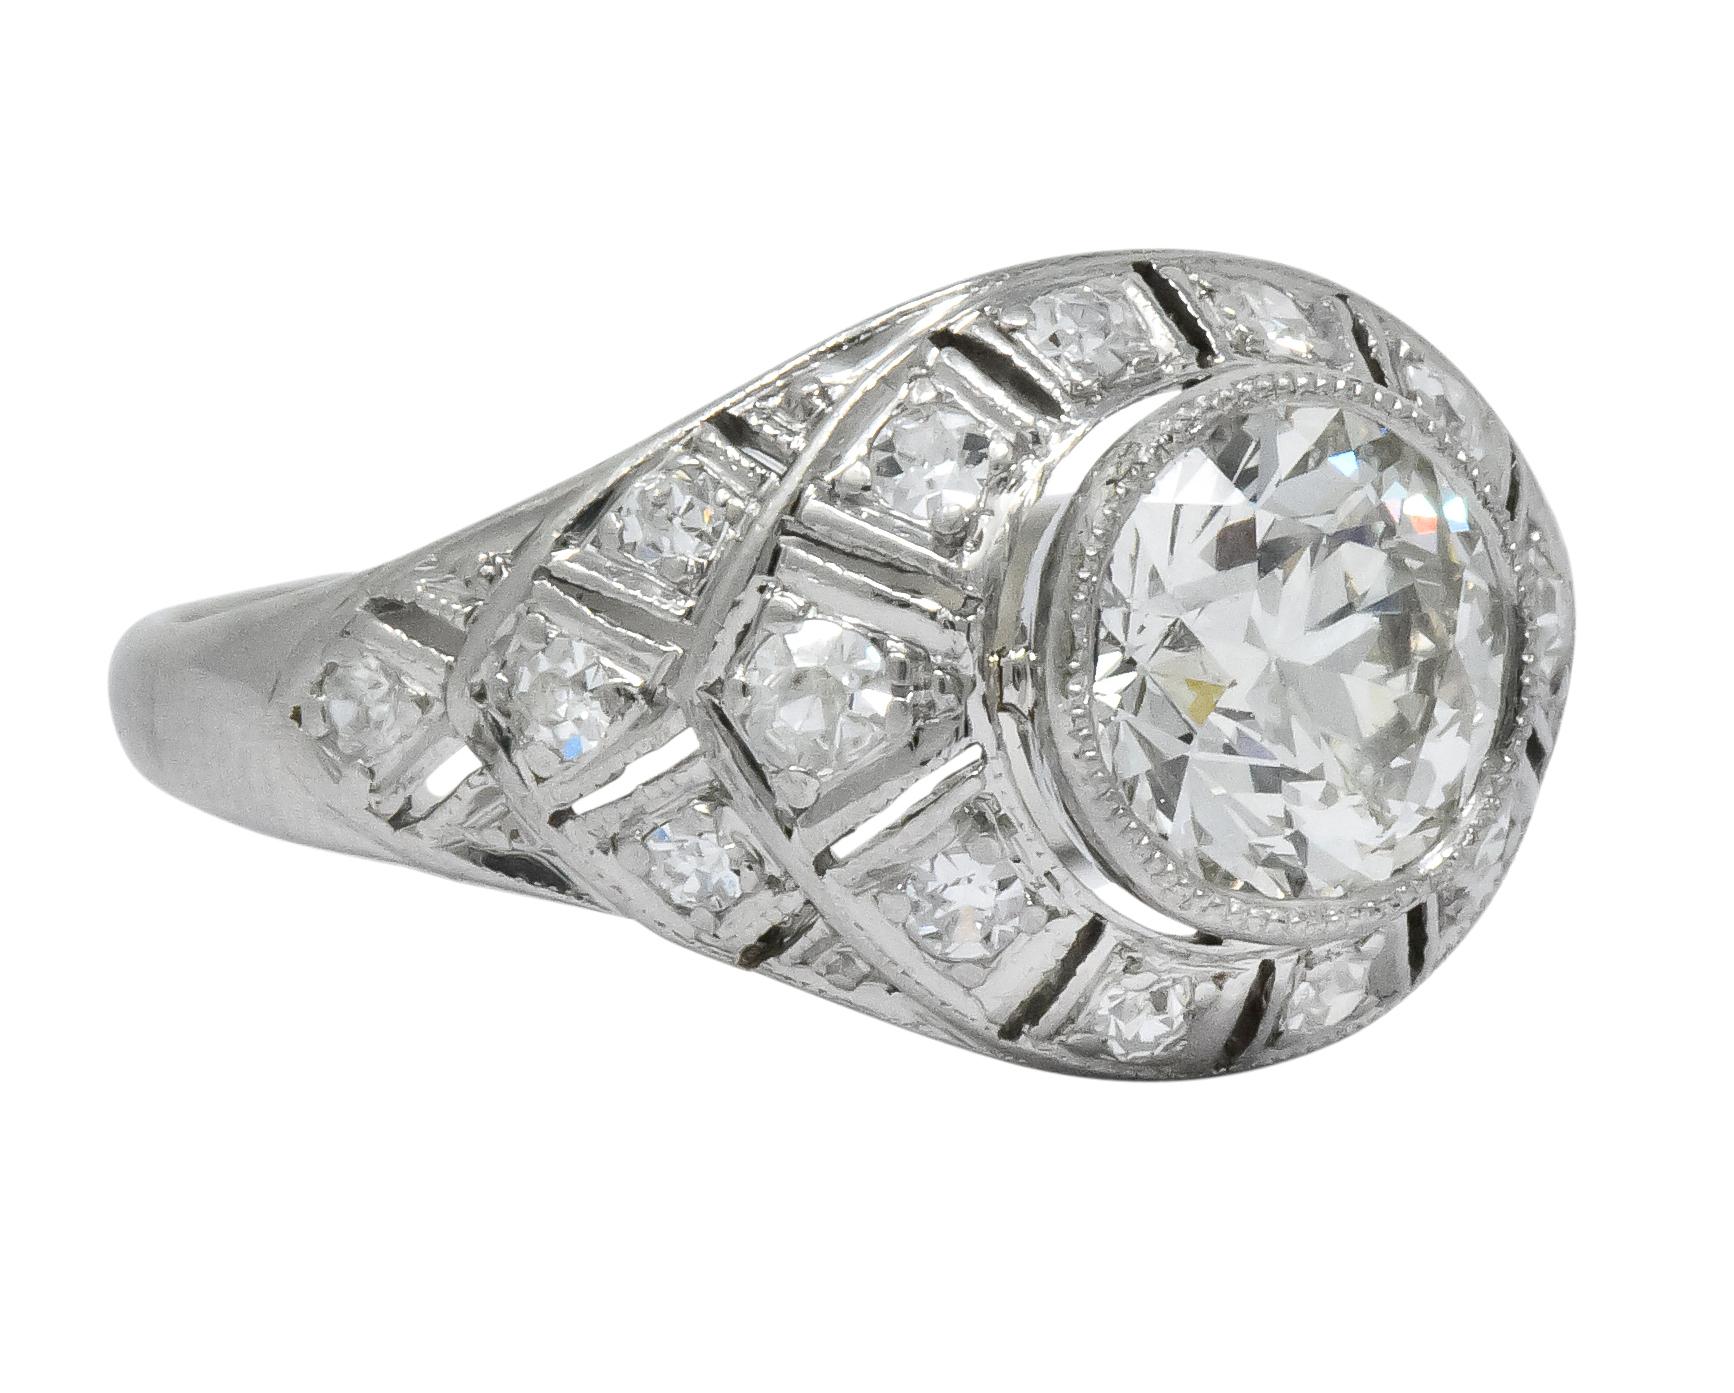 Millegrain bezel setting centering a round brilliant cut diamond weighing 1.14 carats, K color and VVS1 clarity

Surrounded by a pierced and tiered geometric motif, prong set with Swiss cut diamonds weighing approximately 0.26 carat total, H/I color